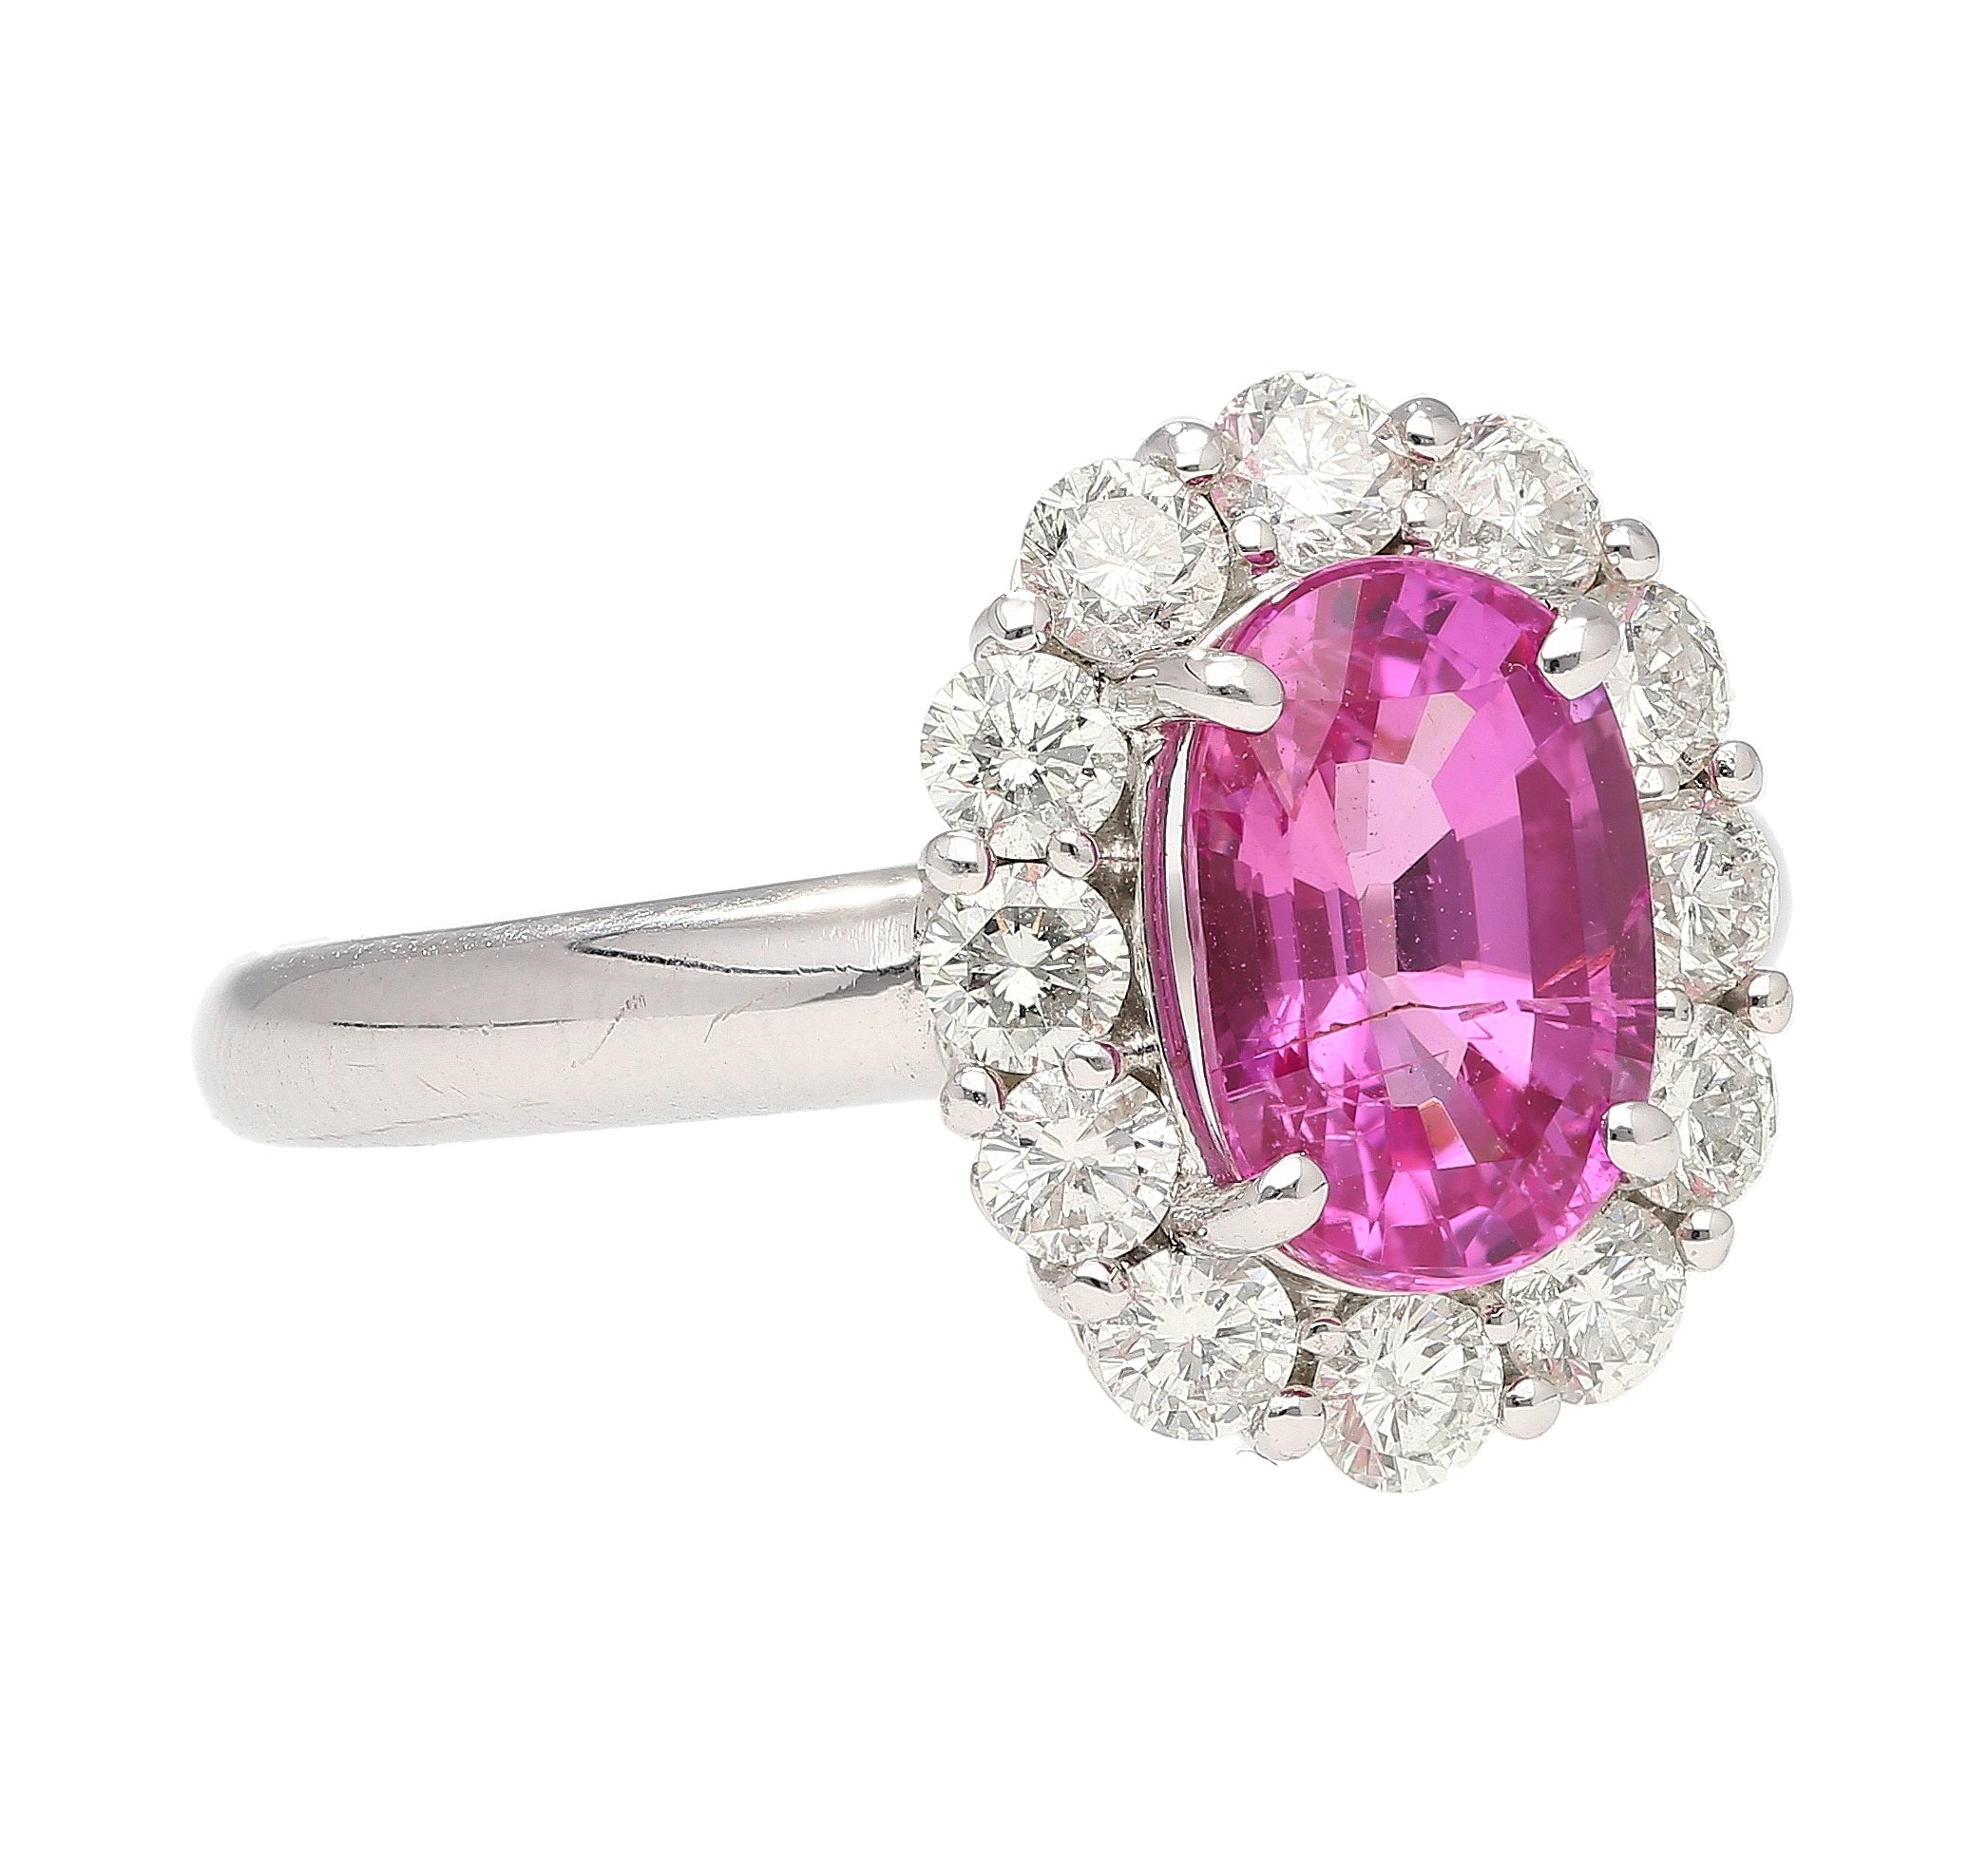 CGTL-Certified-3_96-Carat-Oval-Cut-Pink-Sapphire-and-Diamond-Halo-Ring-in-18k-White-Gold-Rings-2.jpg